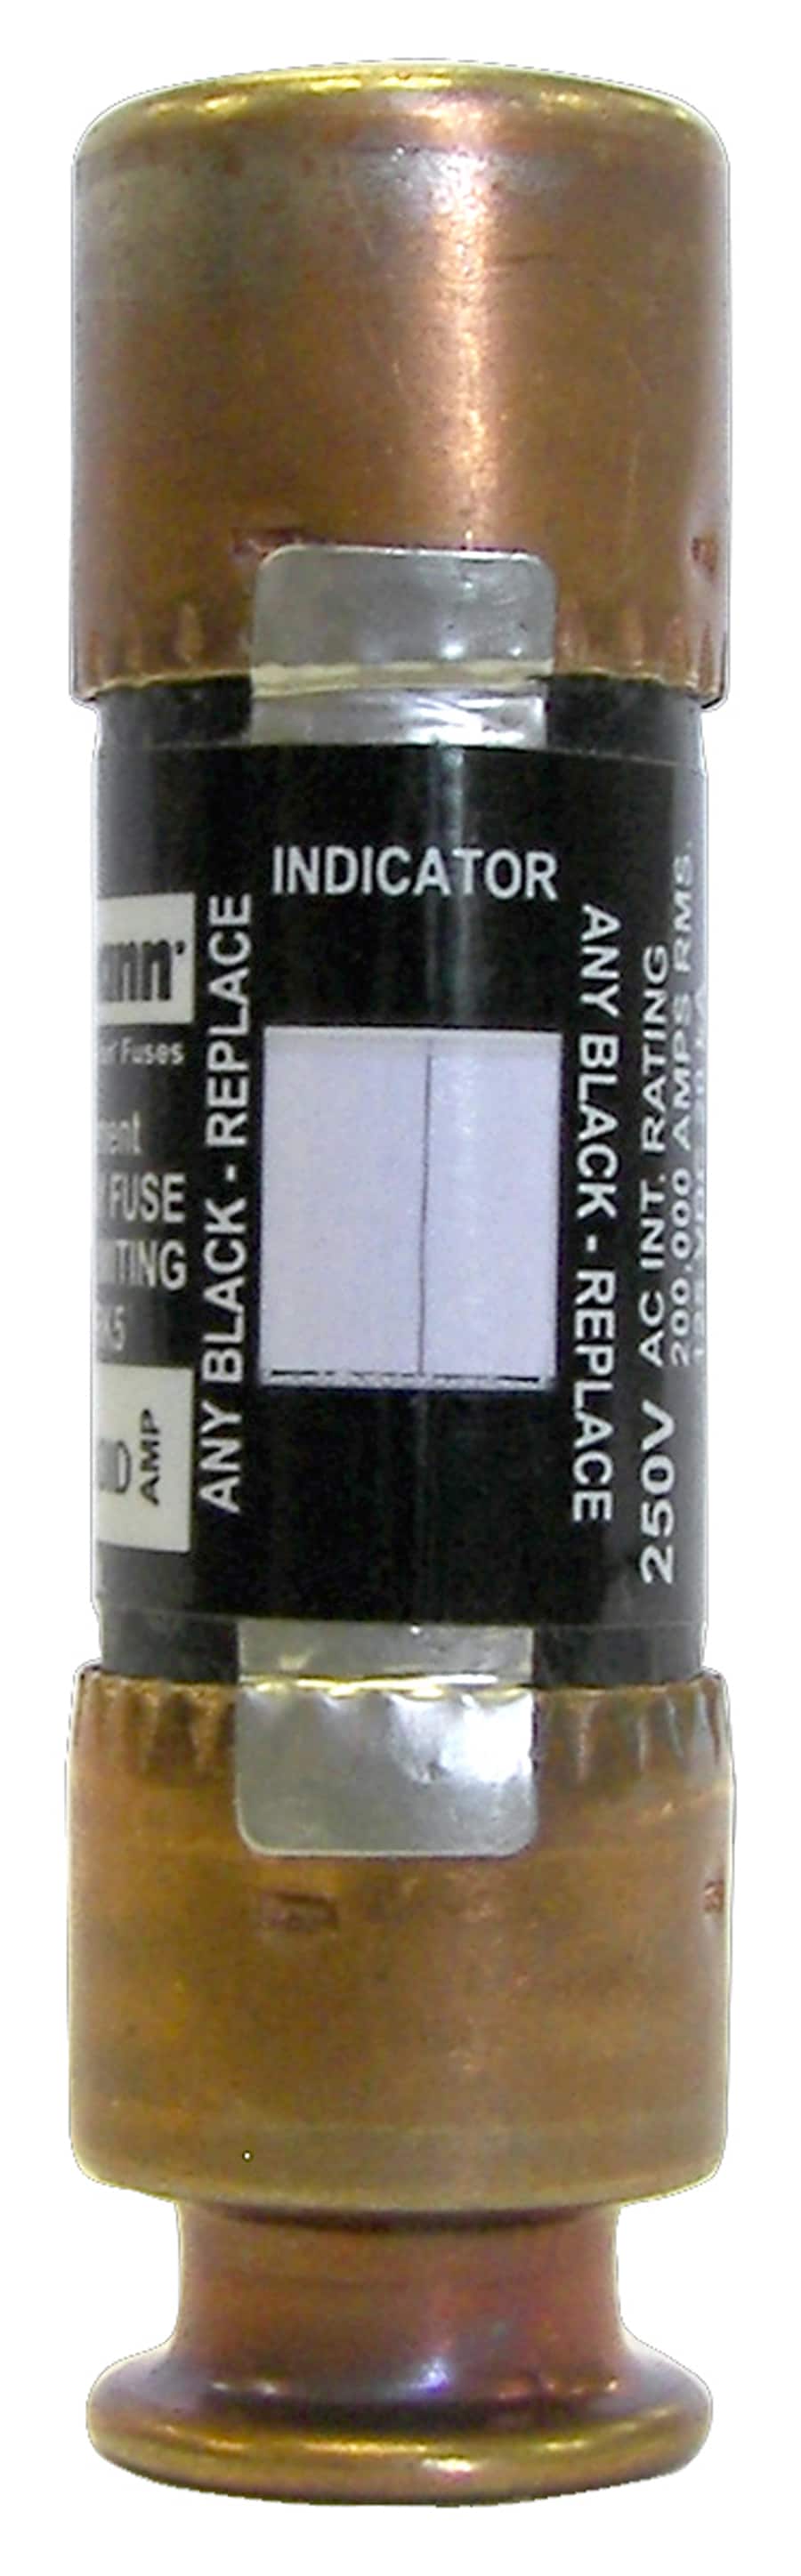 Cooper Bussmann 2-Pack 30-Amp Fast Acting Cartridge Fuse